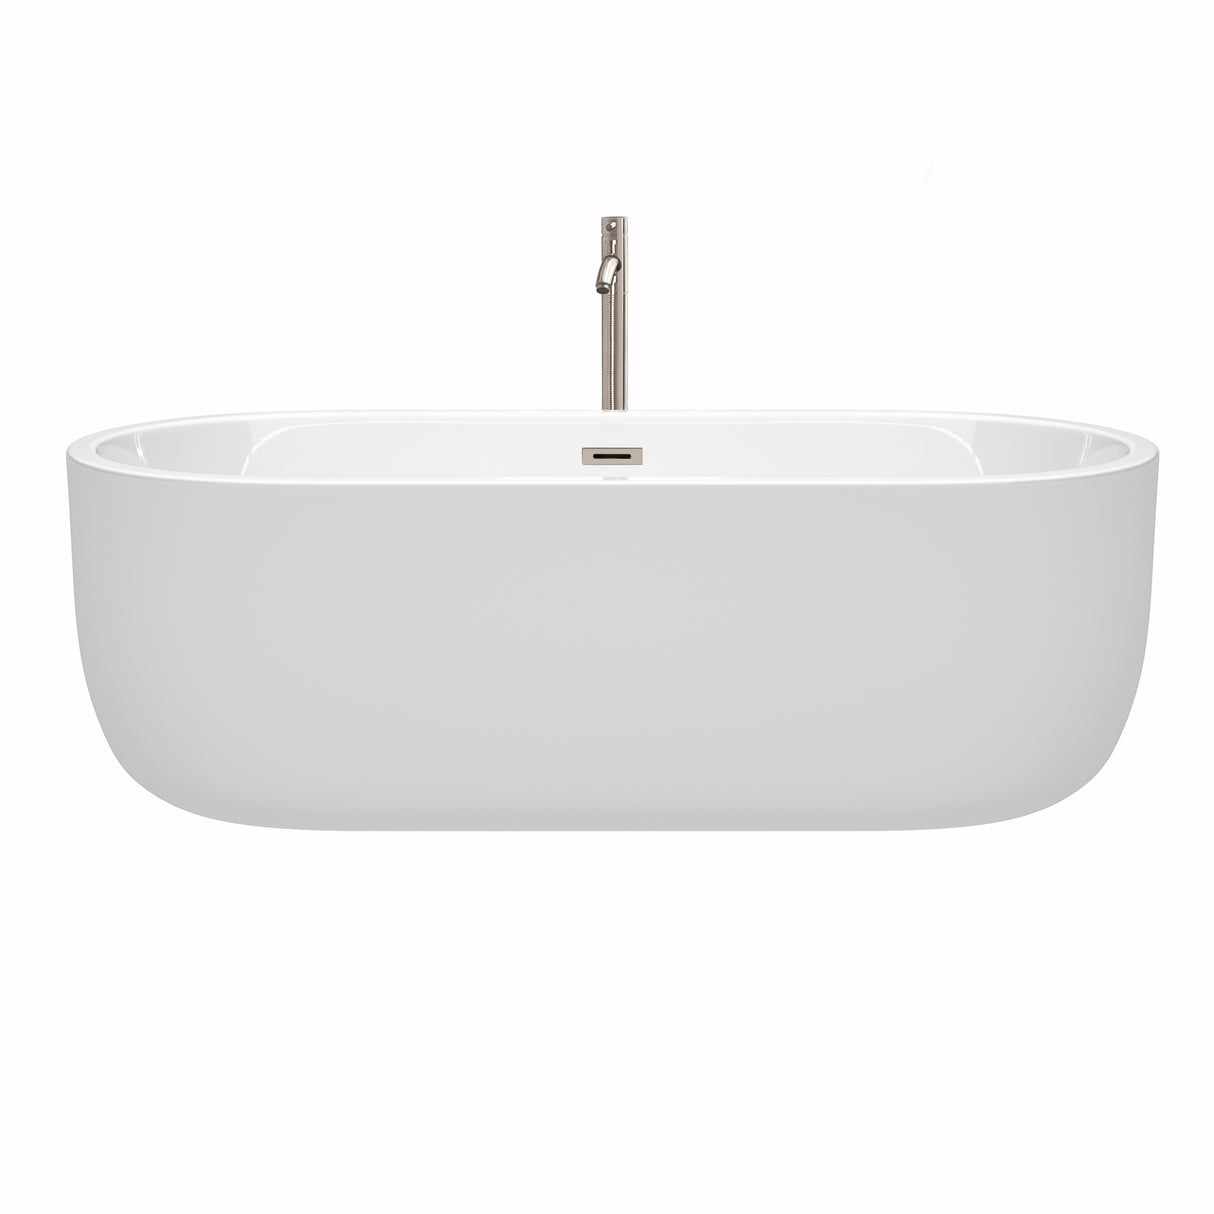 Juliette 71 Inch Freestanding Bathtub in White with Floor Mounted Faucet Drain and Overflow Trim in Brushed Nickel